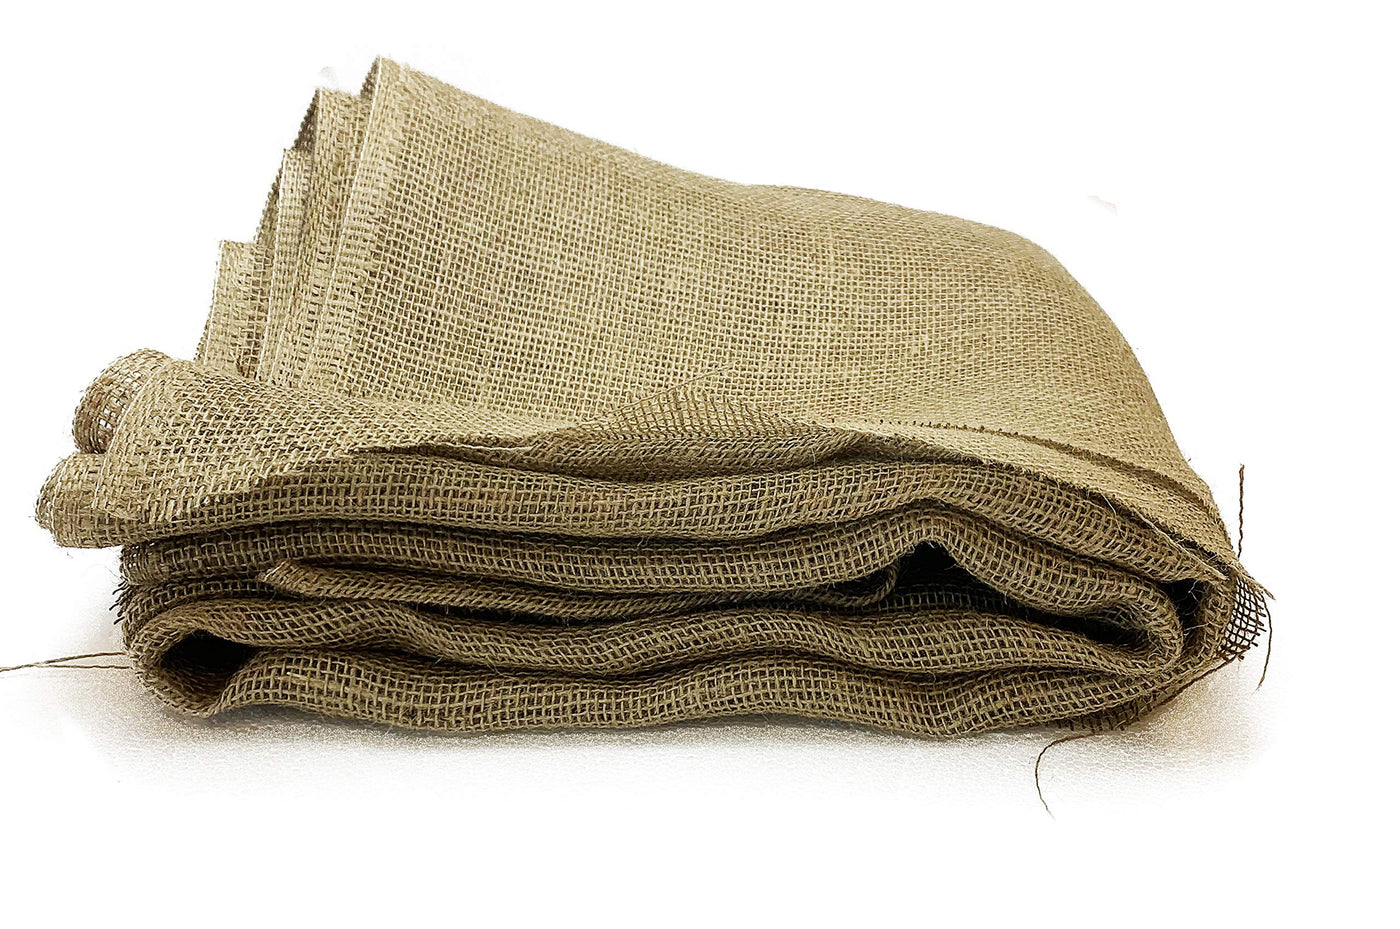 72” Inch X 15 Feet Gardening Burlap Liners, Lose Weave Jute-Burlap for Raised Bed, Seed Cover and Garden Blanket (72 Inch X 15 feet, 72"x15'L)